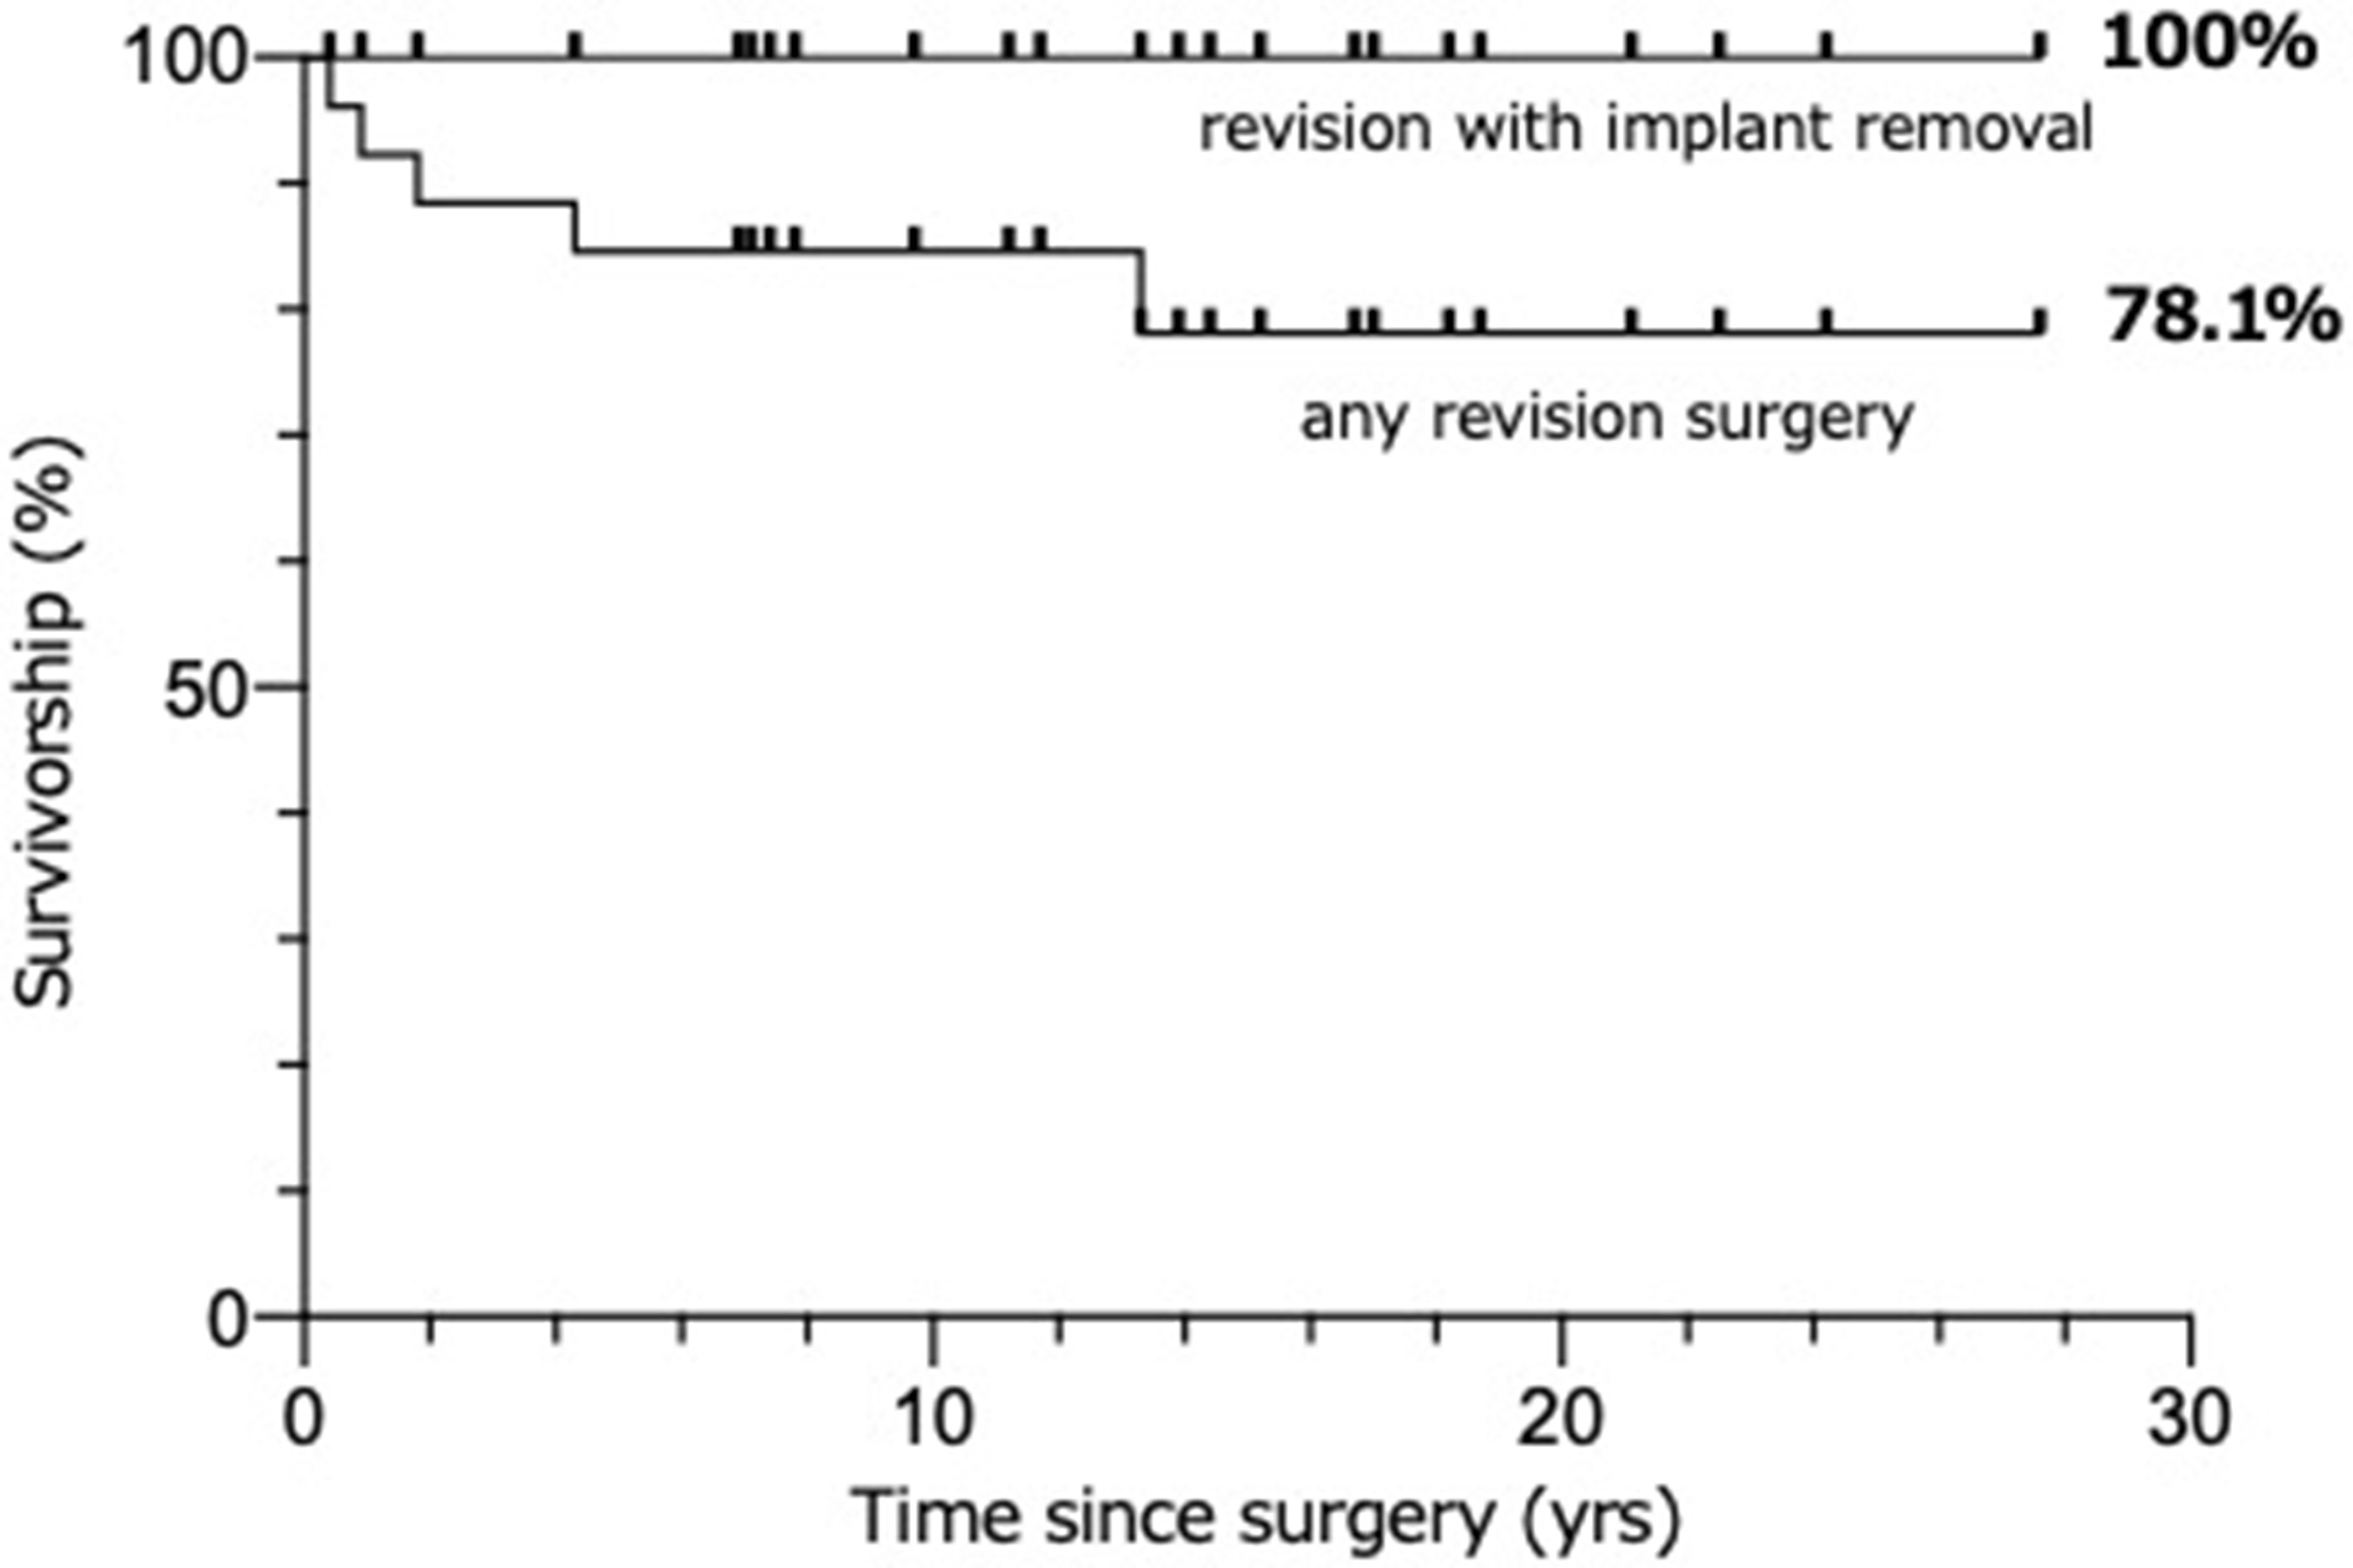 Fig. 1 
            Kaplan-Meier survivorship curves for unlinked total elbow arthroplasty in rheumatoid arthritis patients aged less than 50 years, with any revision surgery and revision with implant removal as the endpoints.
          